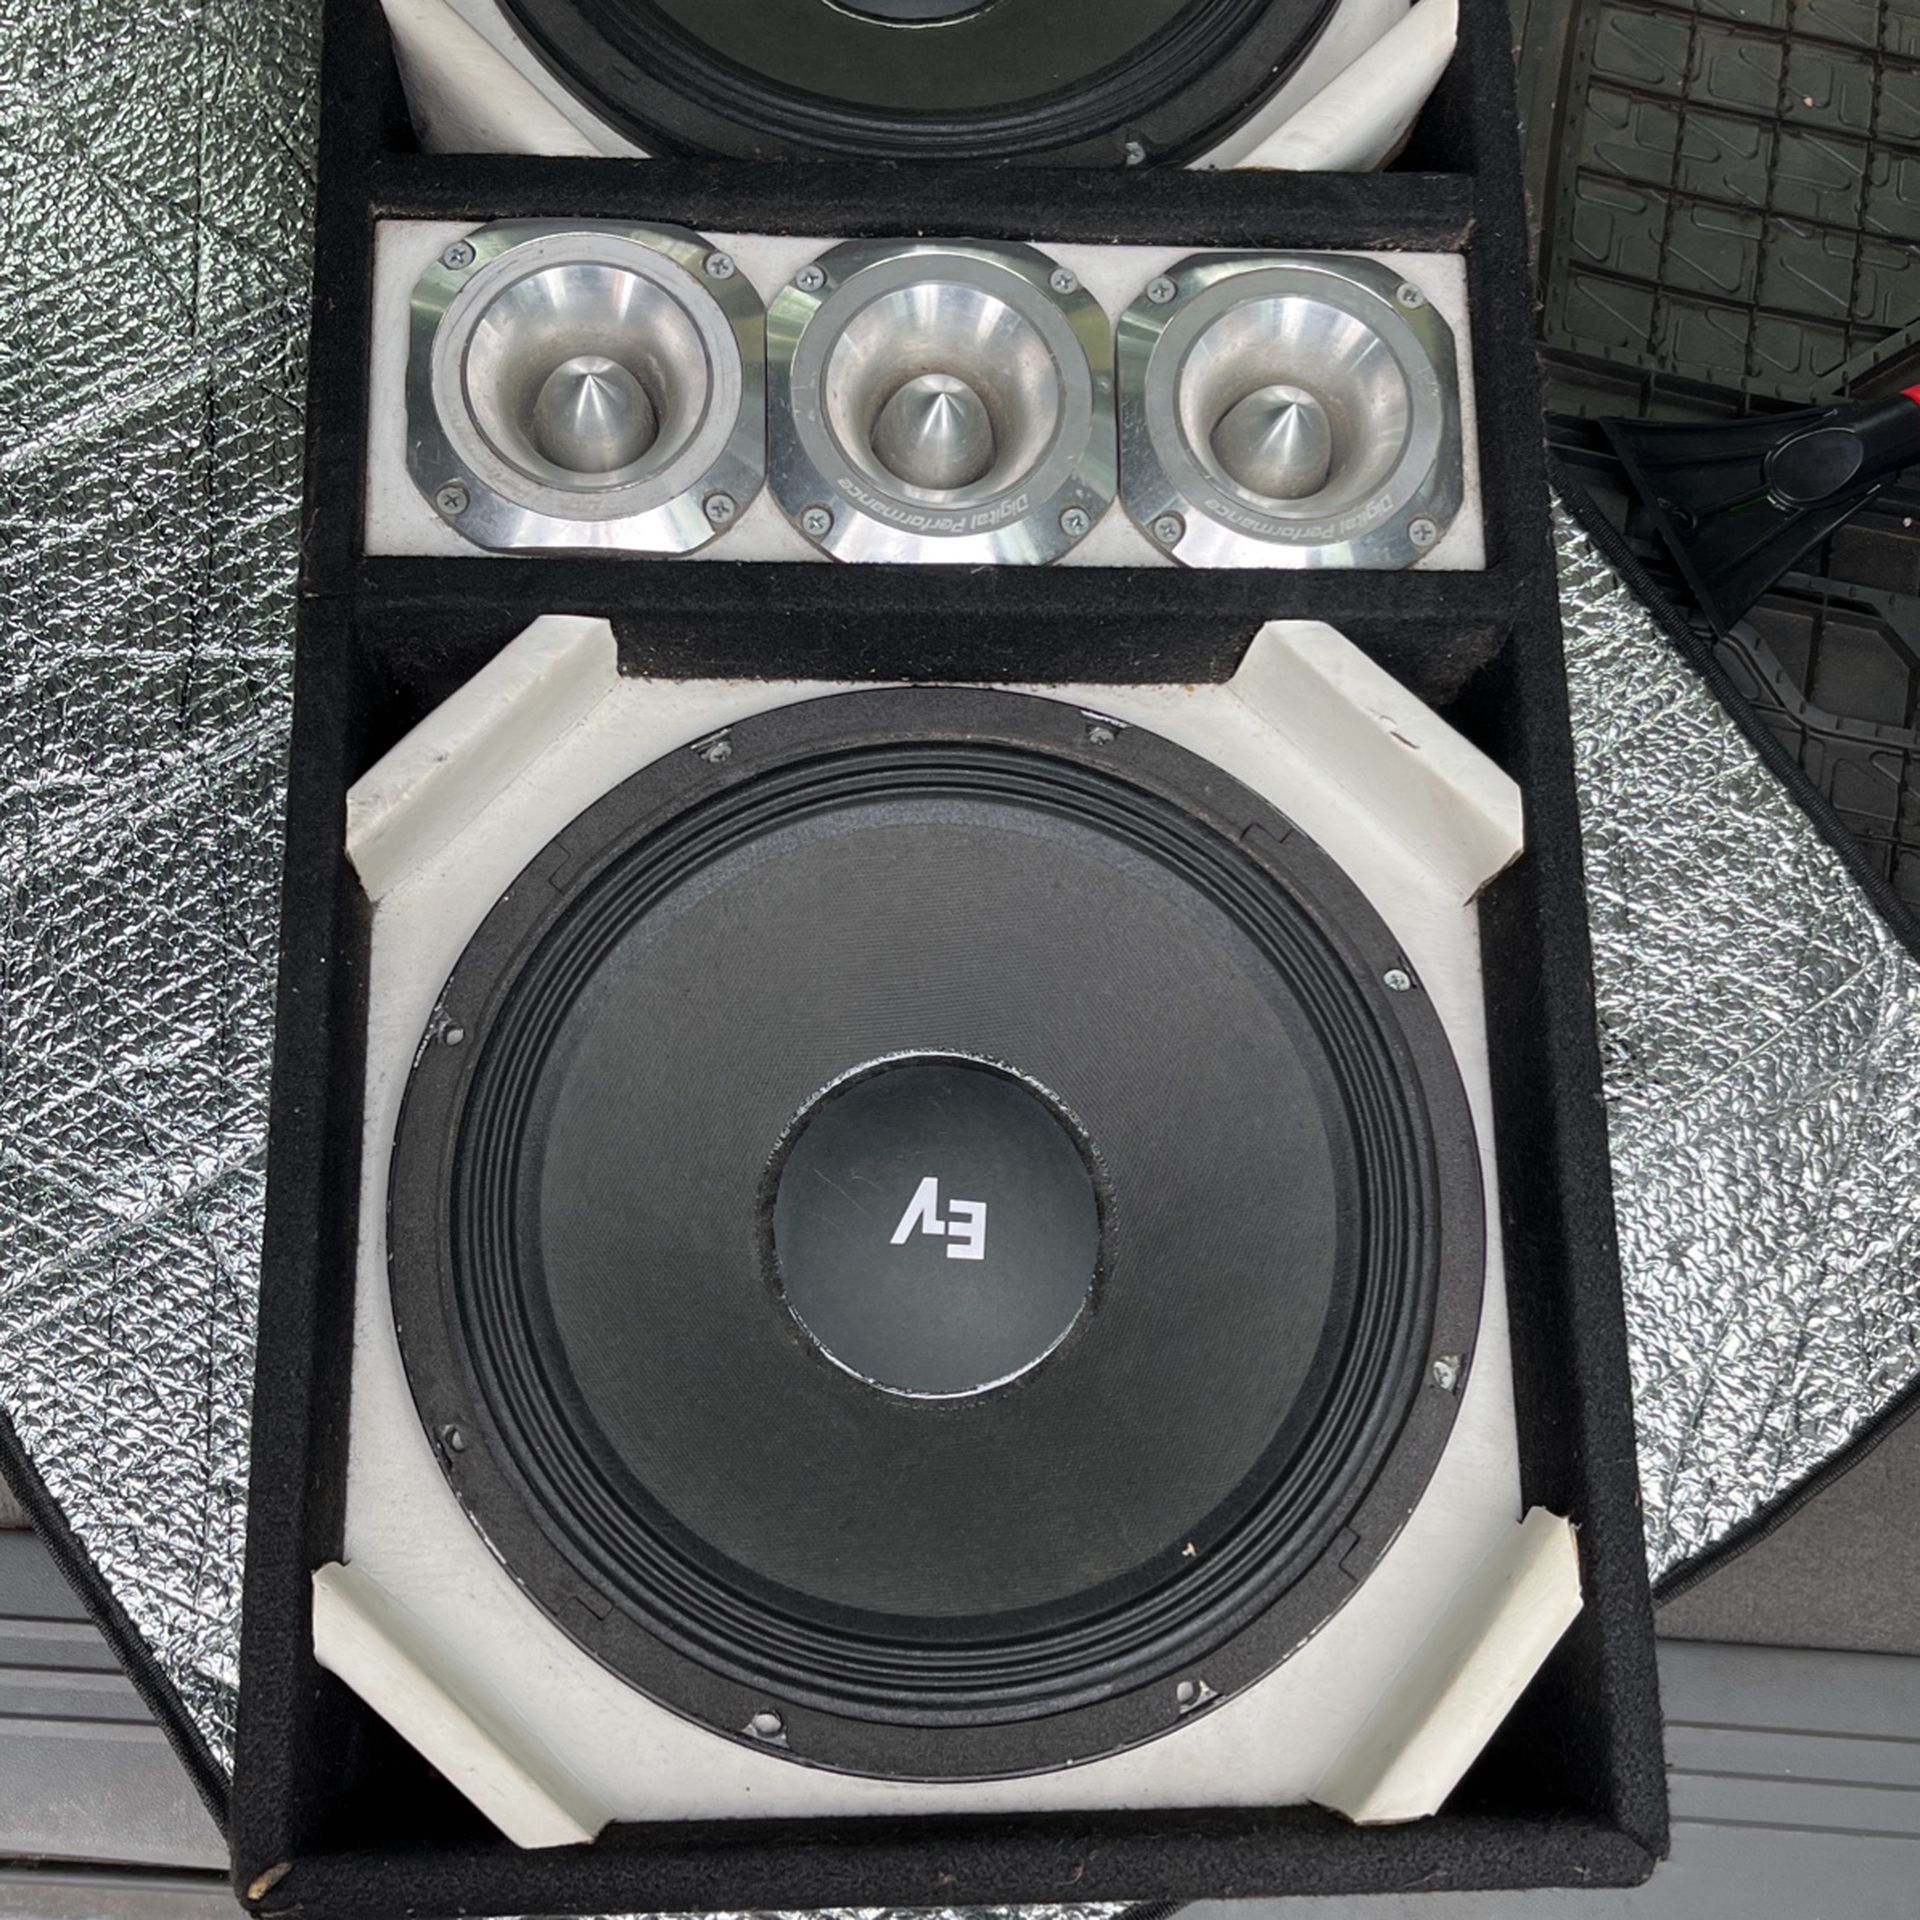 Evz 12 Inch Mega Bass With Chuchero Box And Tweeters 400 Or Best Offer 